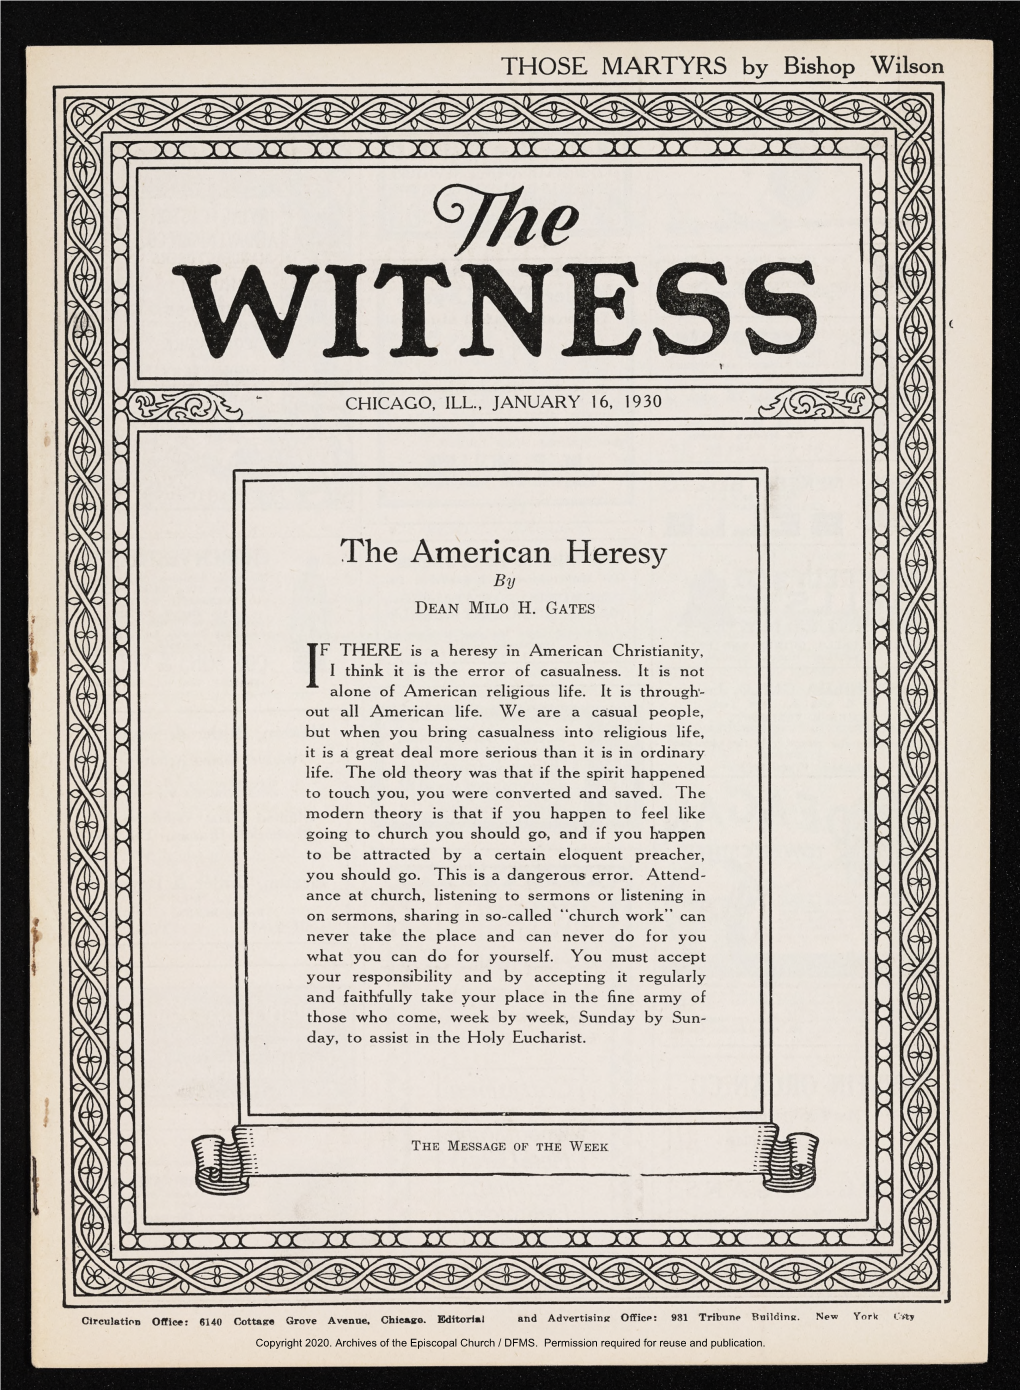 1930 the Witness, Vol. 14, No. 23. January 16, 1930